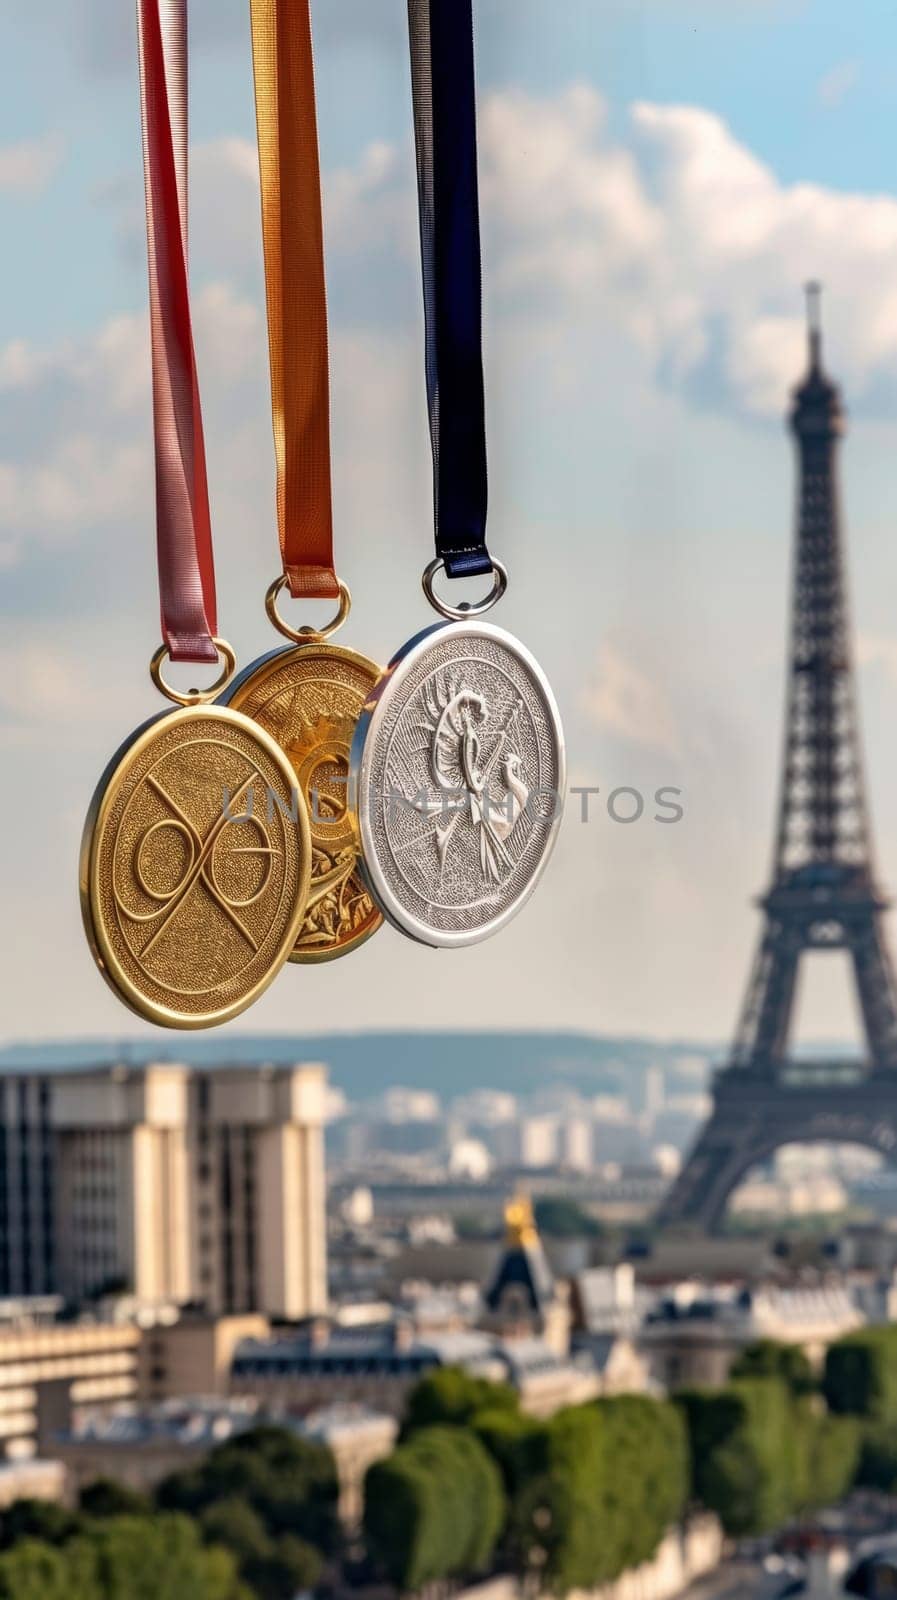 A sharp photo captures medals with intricate designs against a crisp Paris backdrop, including the majestic Eiffel Tower under a clear sky